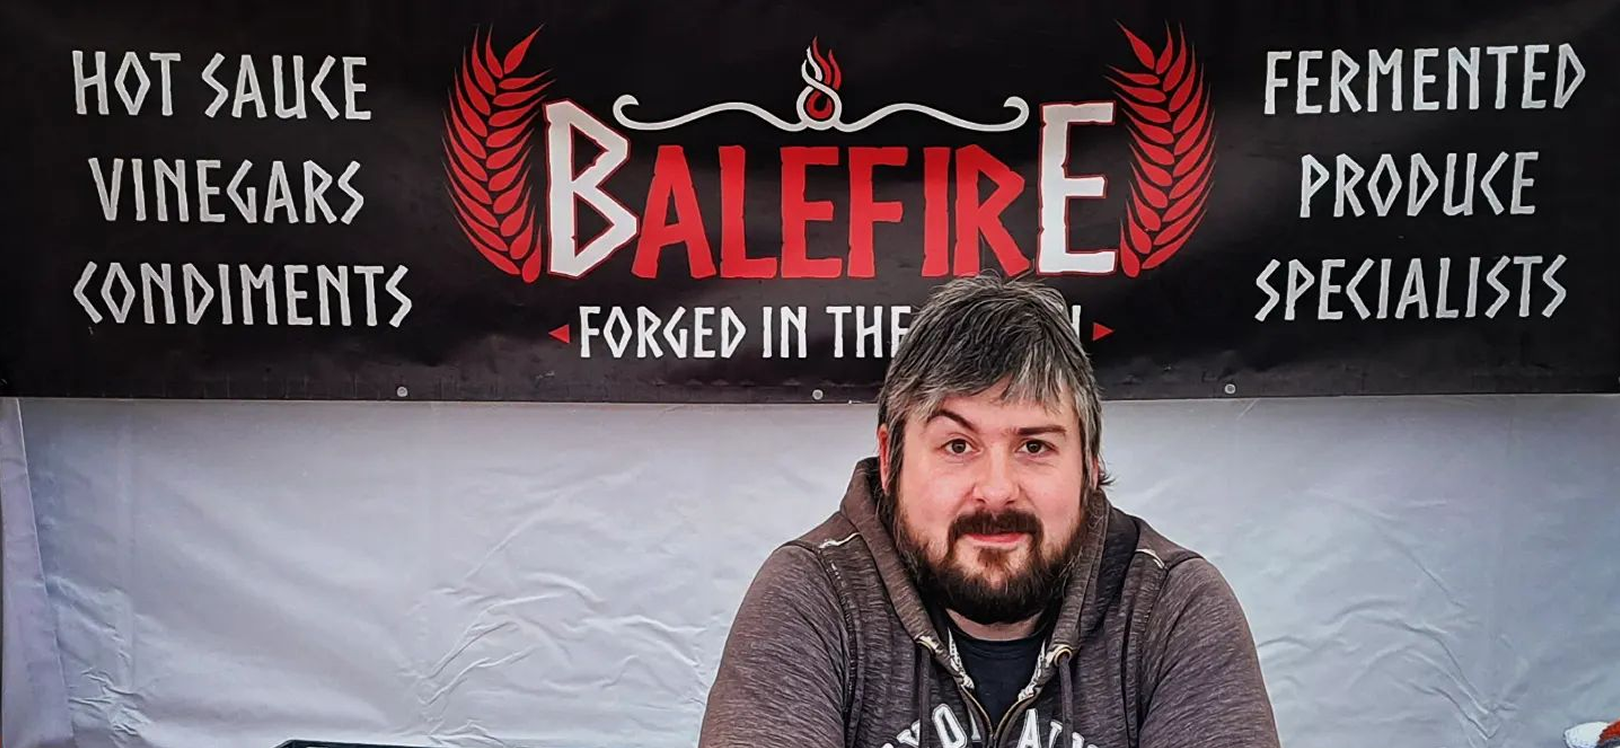 A man in front of a Balefire sign